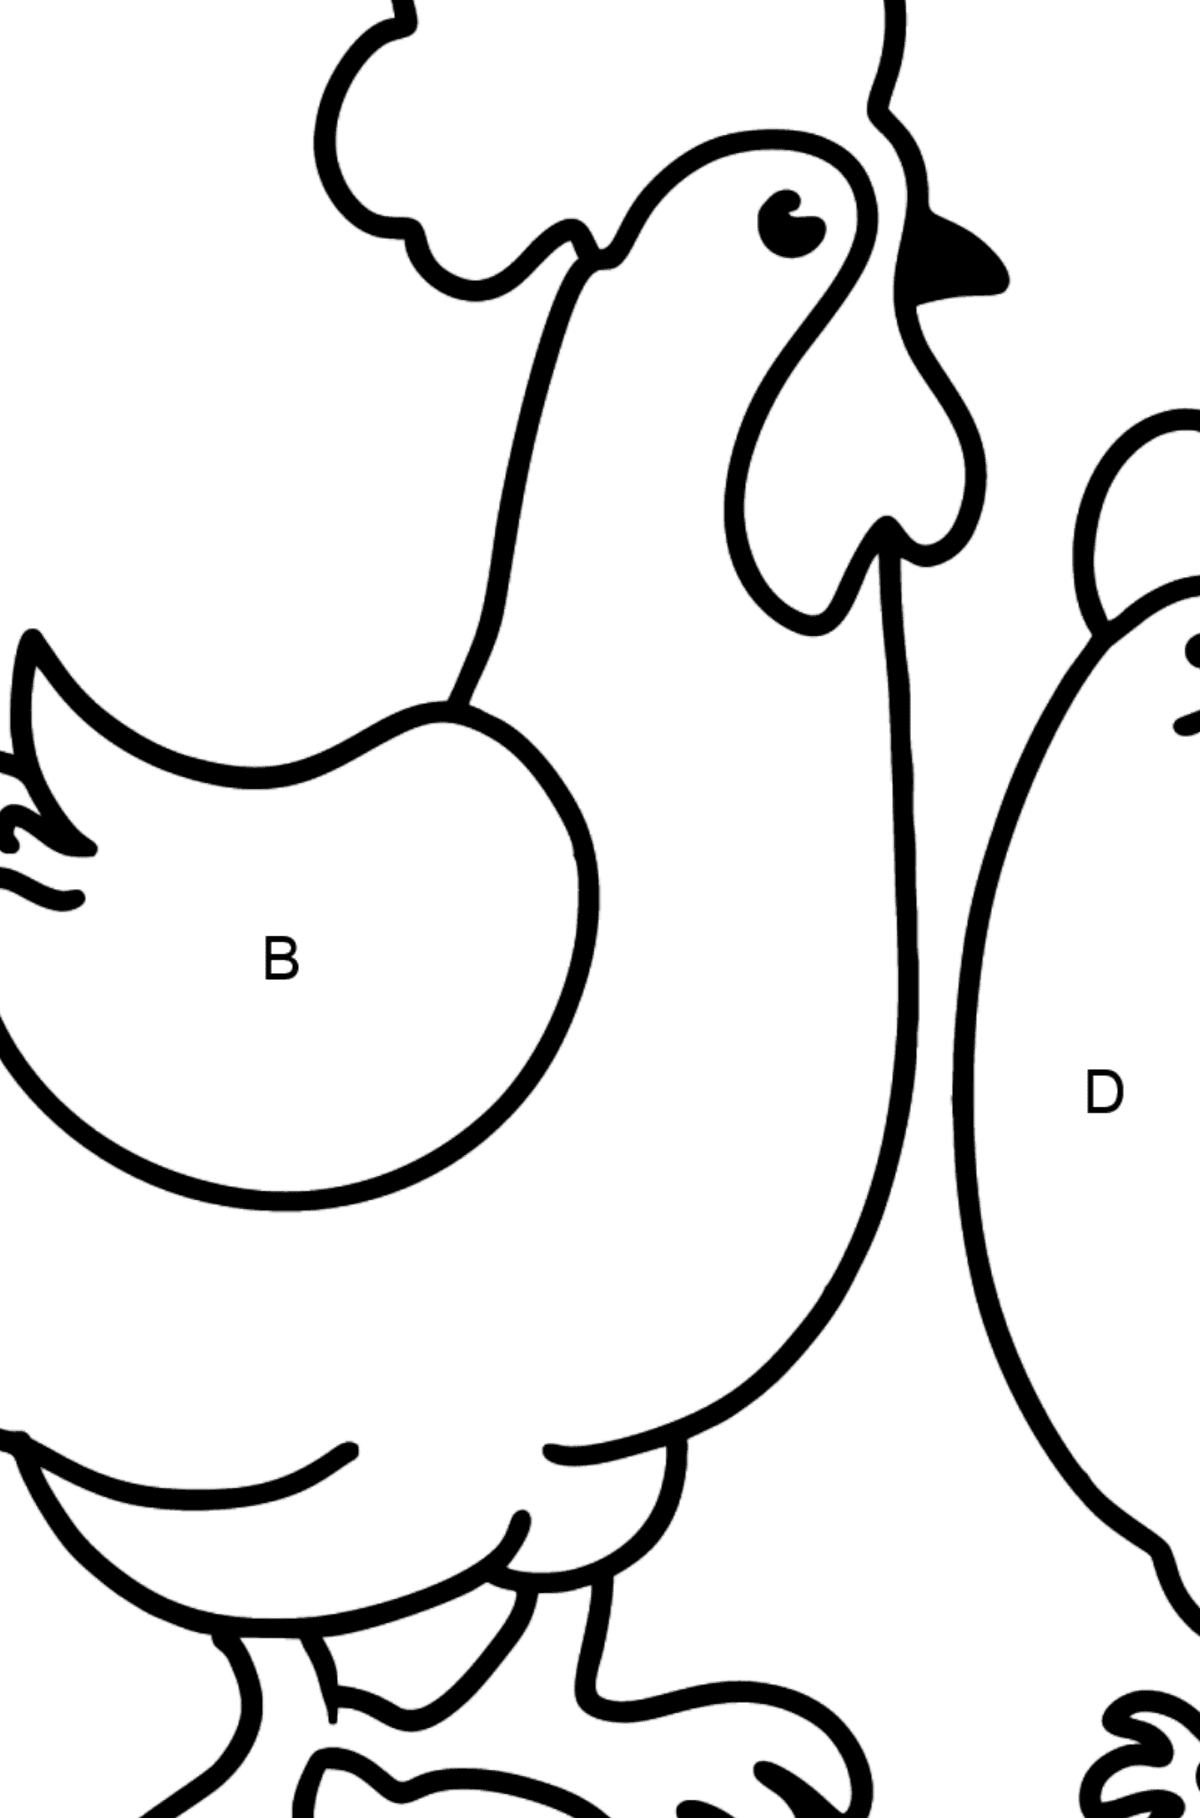 Rooster and Hen coloring page - Coloring by Letters for Kids